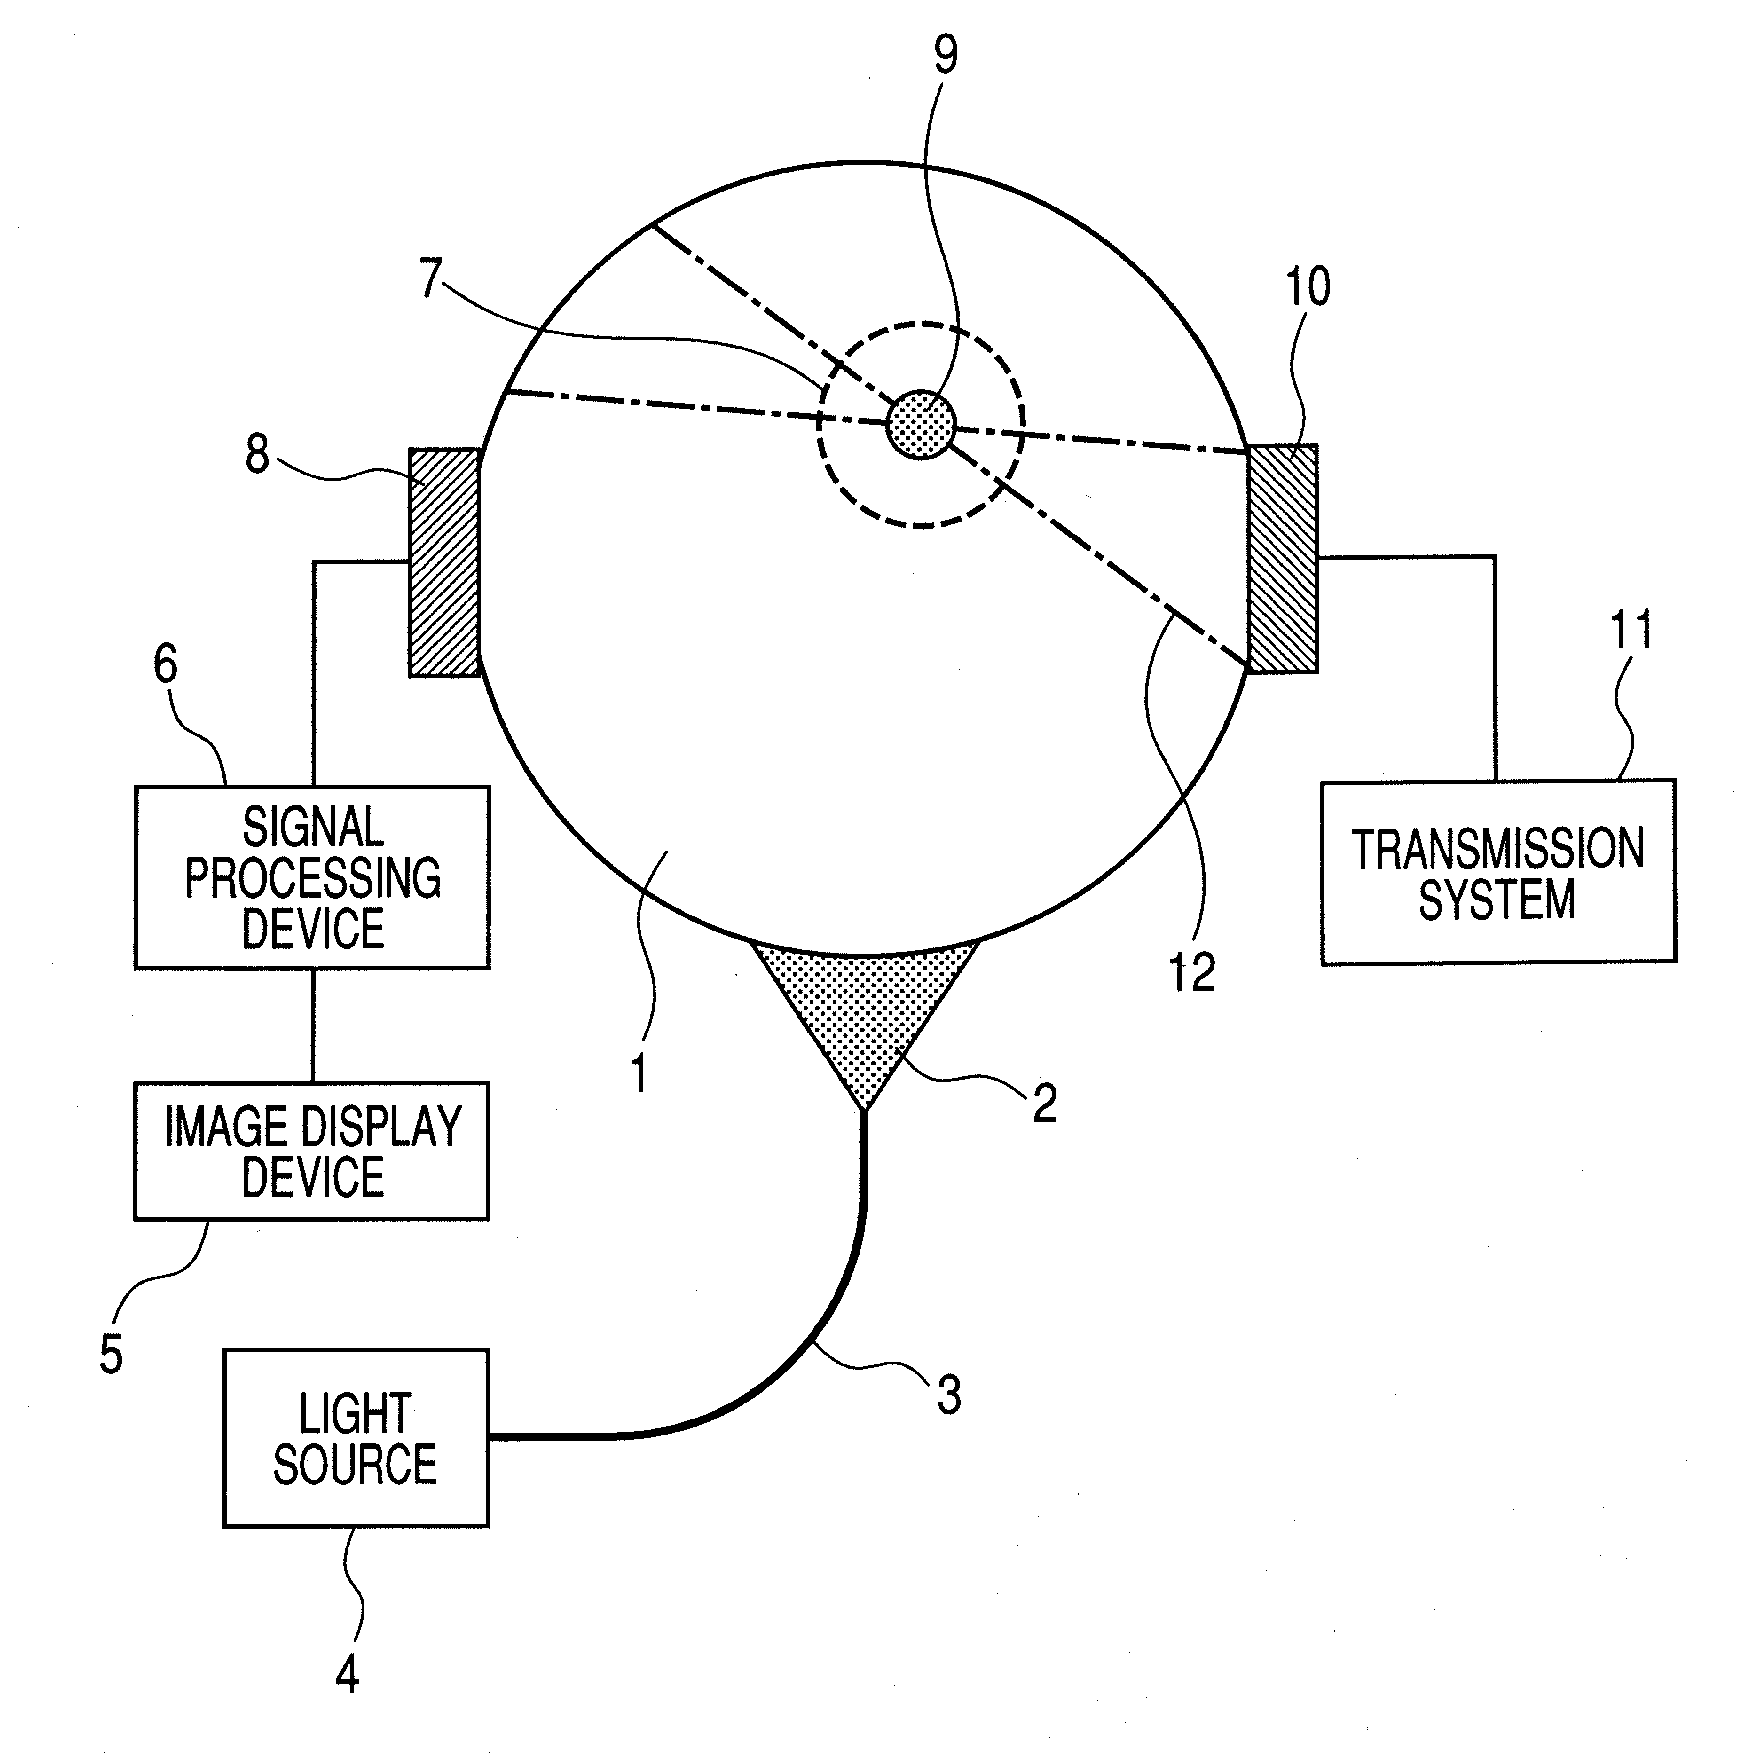 Biological information imaging apparatus and method for analyzing biological information